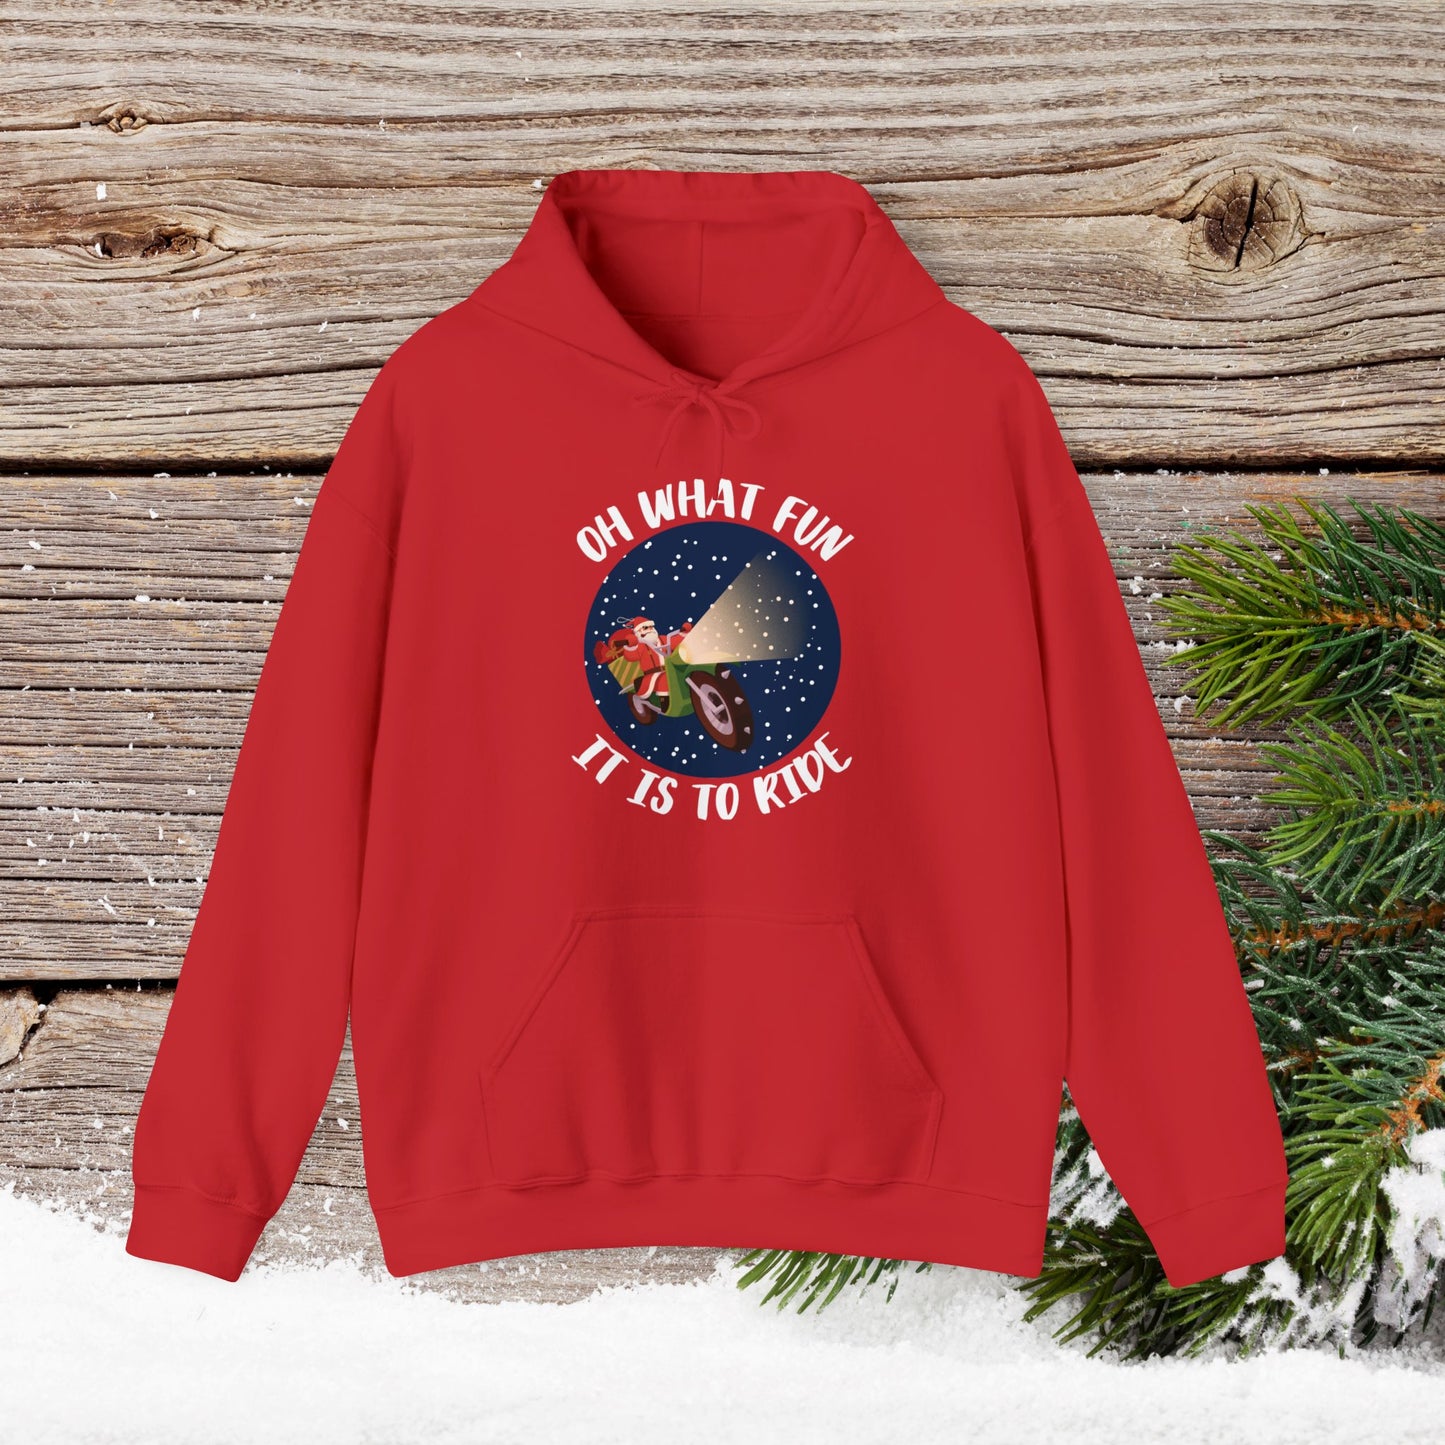 Christmas Hoodie - Oh What Fun It Is To Ride - Mens and Boys Christmas Shirts - Youth and Adult Christmas Hooded Sweatshirt Hooded Sweatshirt Graphic Avenue Red Adult Small 